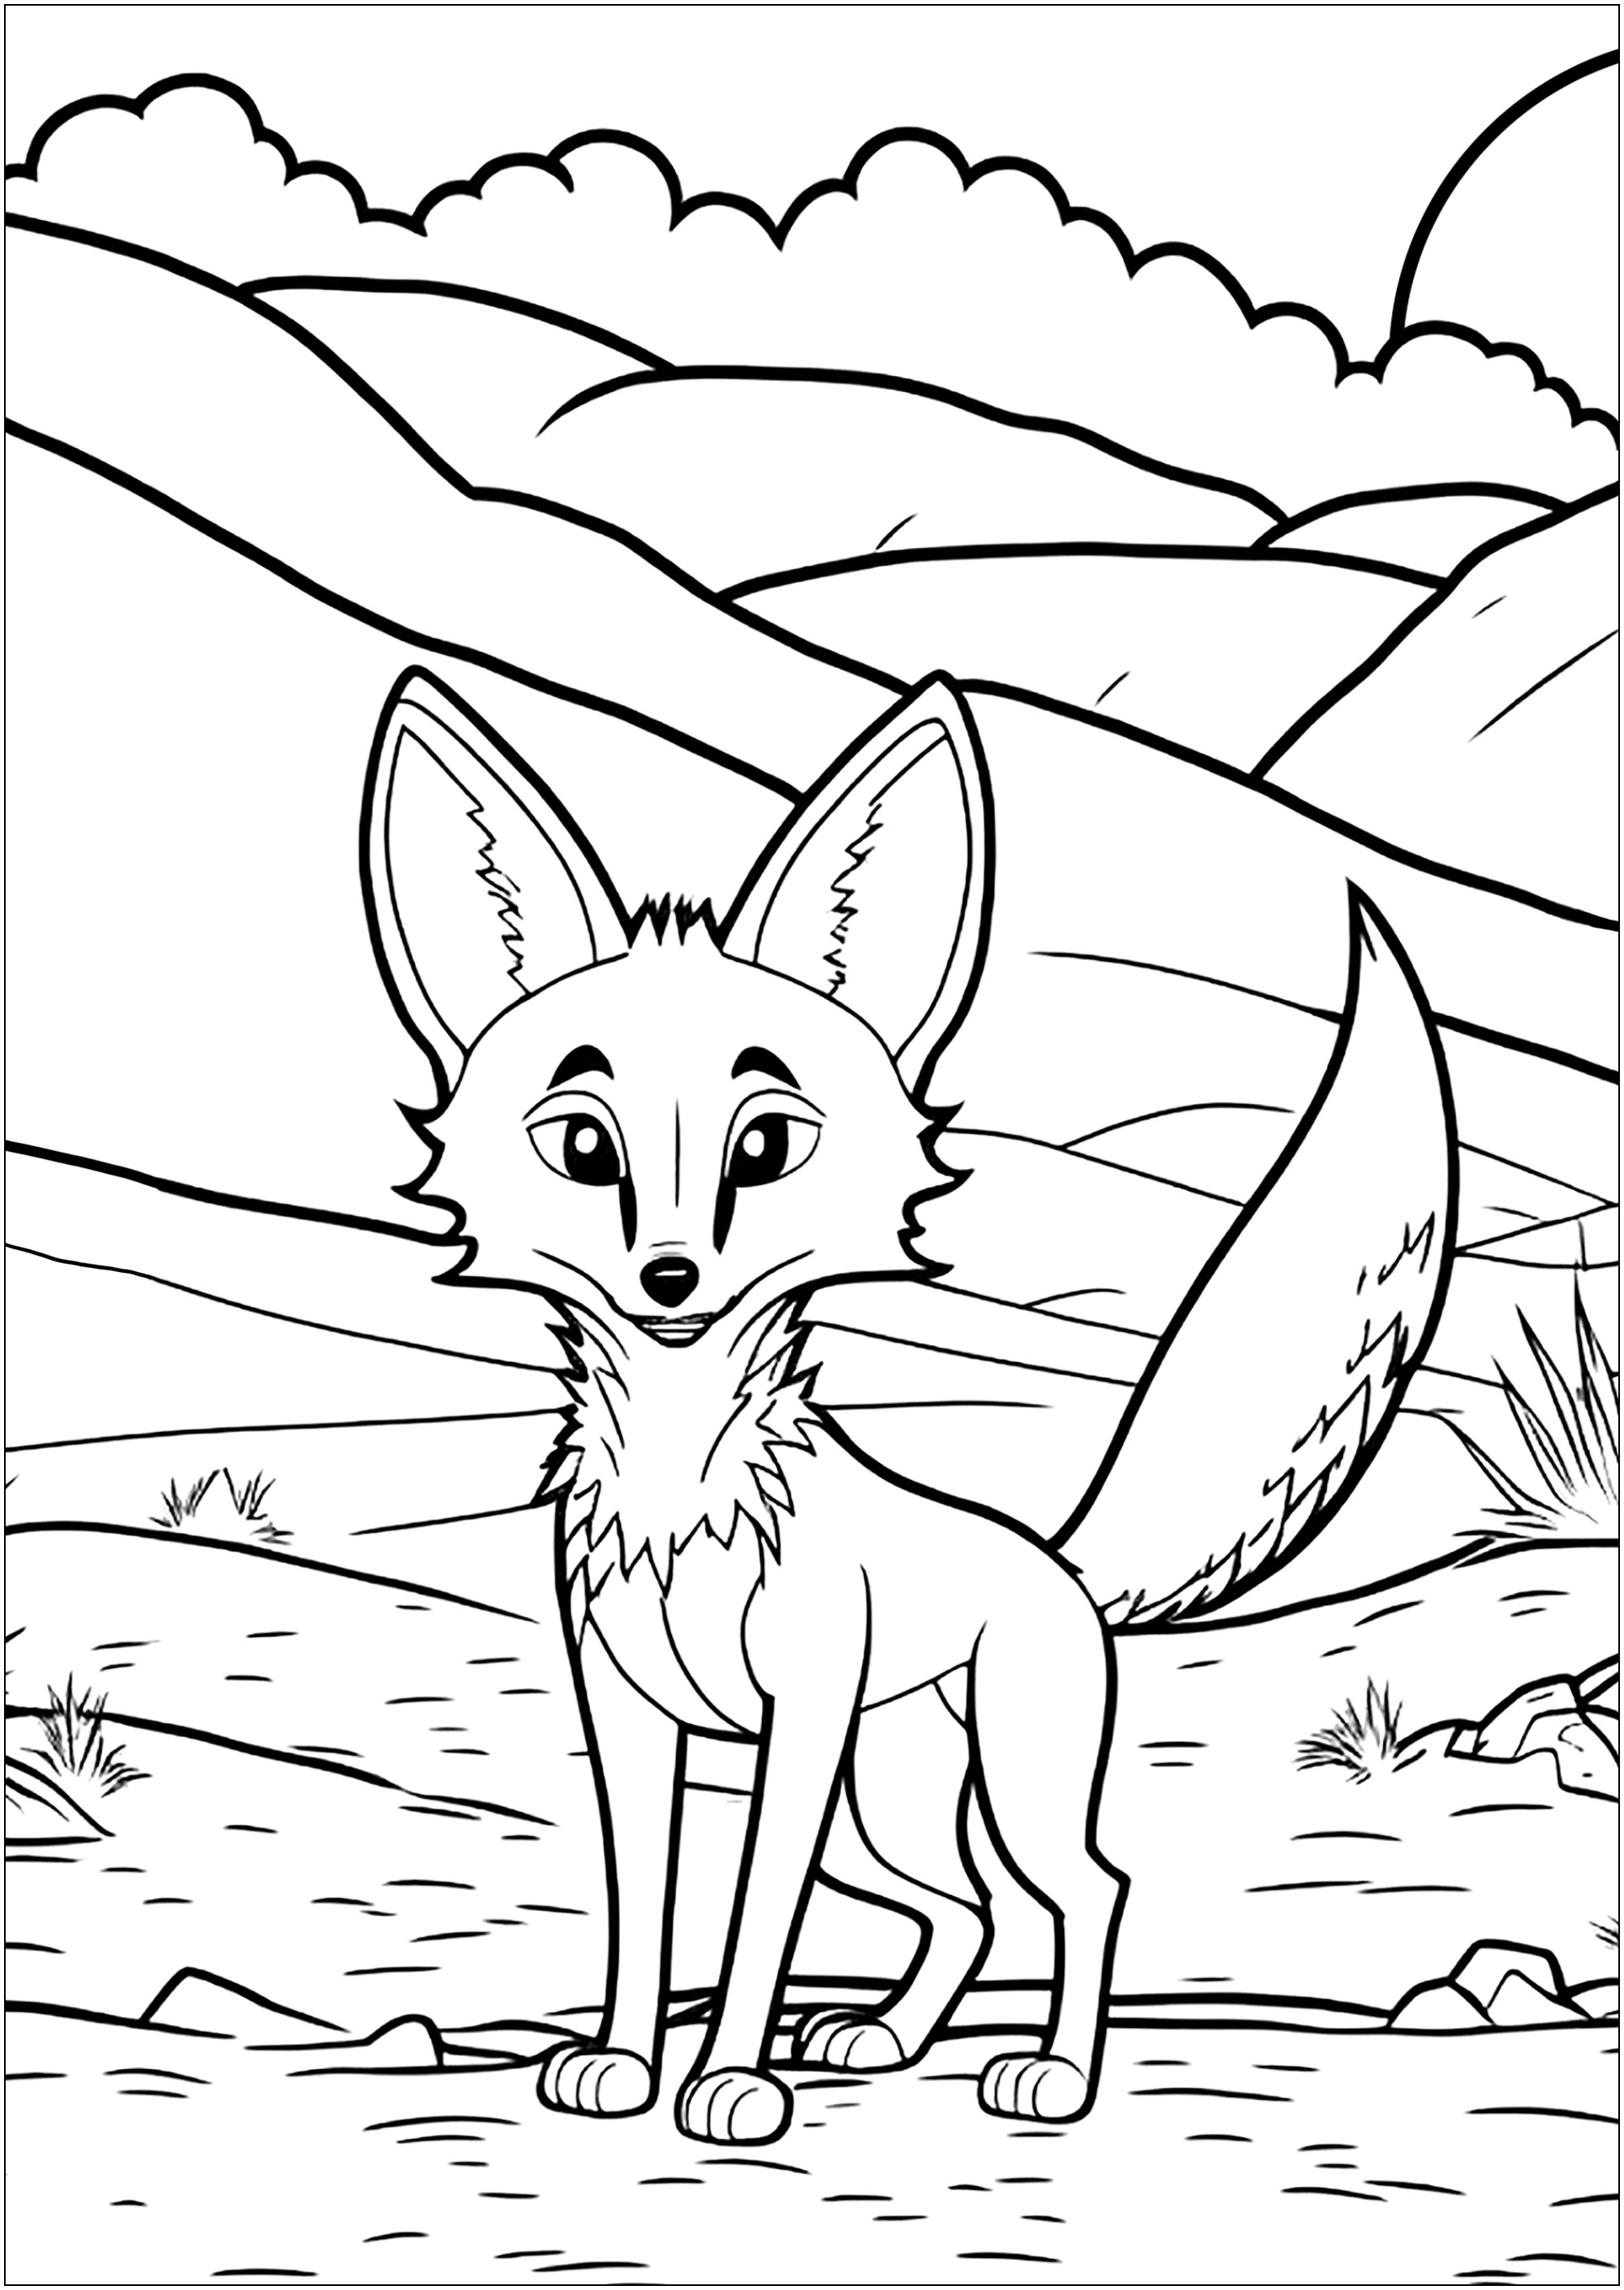 Simple coloring of a smart fox, in a nice landscape. A fairly simple coloring page with large areas to color.